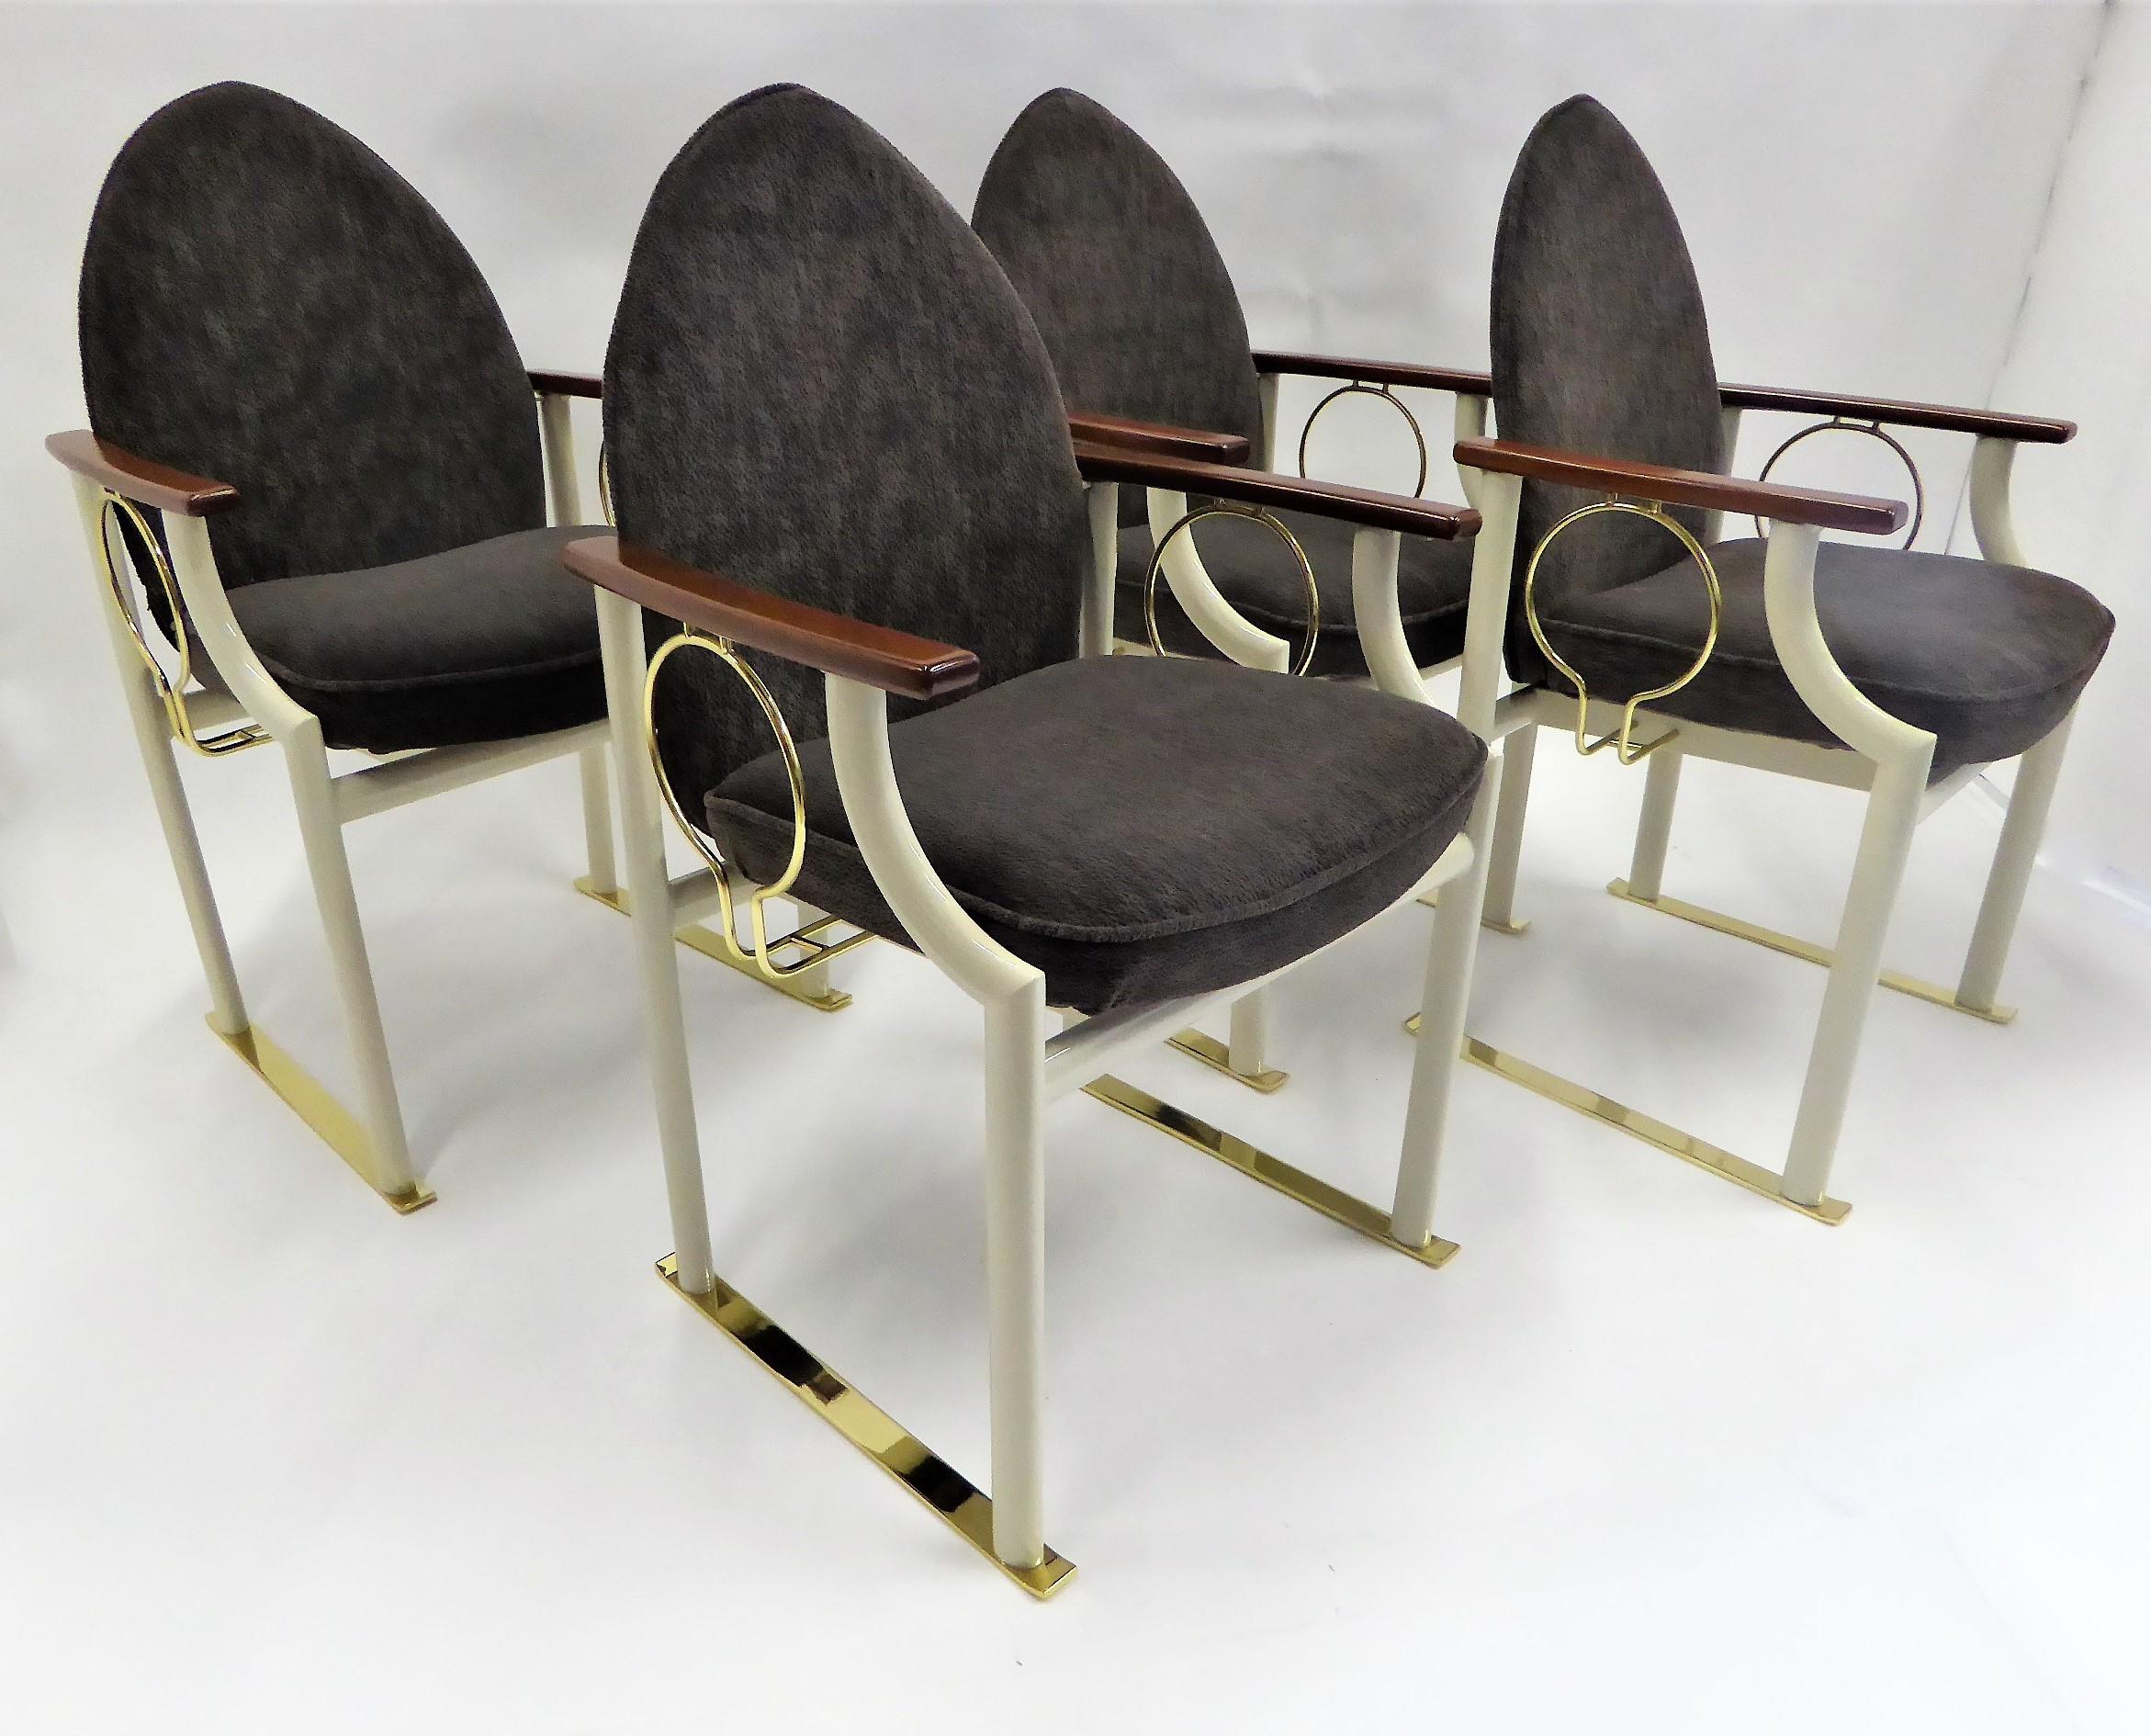 REDUCED FROM $4,250....,Unique dining or breakfast chairs or game table chairs. Memphis inspired arch backed with a lacquered tubular metal body with brass sled legs and circular brass under arm slats. Mahogany wood arms. Reupholstered in a rich and